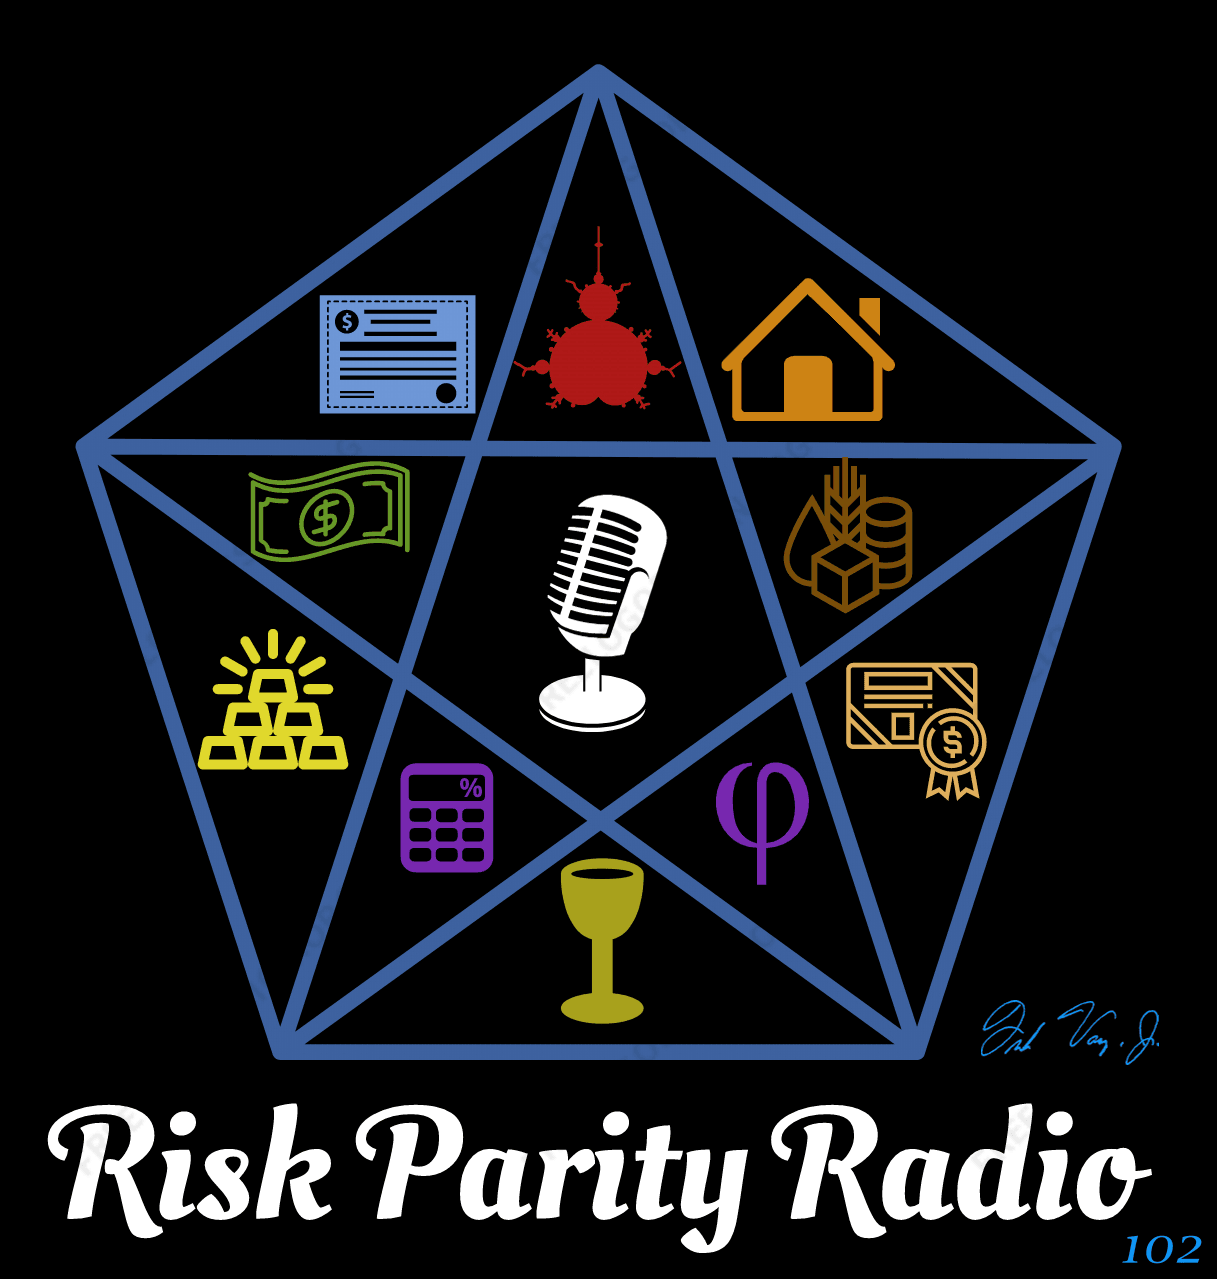 Limited Edition Risk Parity Radio Autographed Print #102